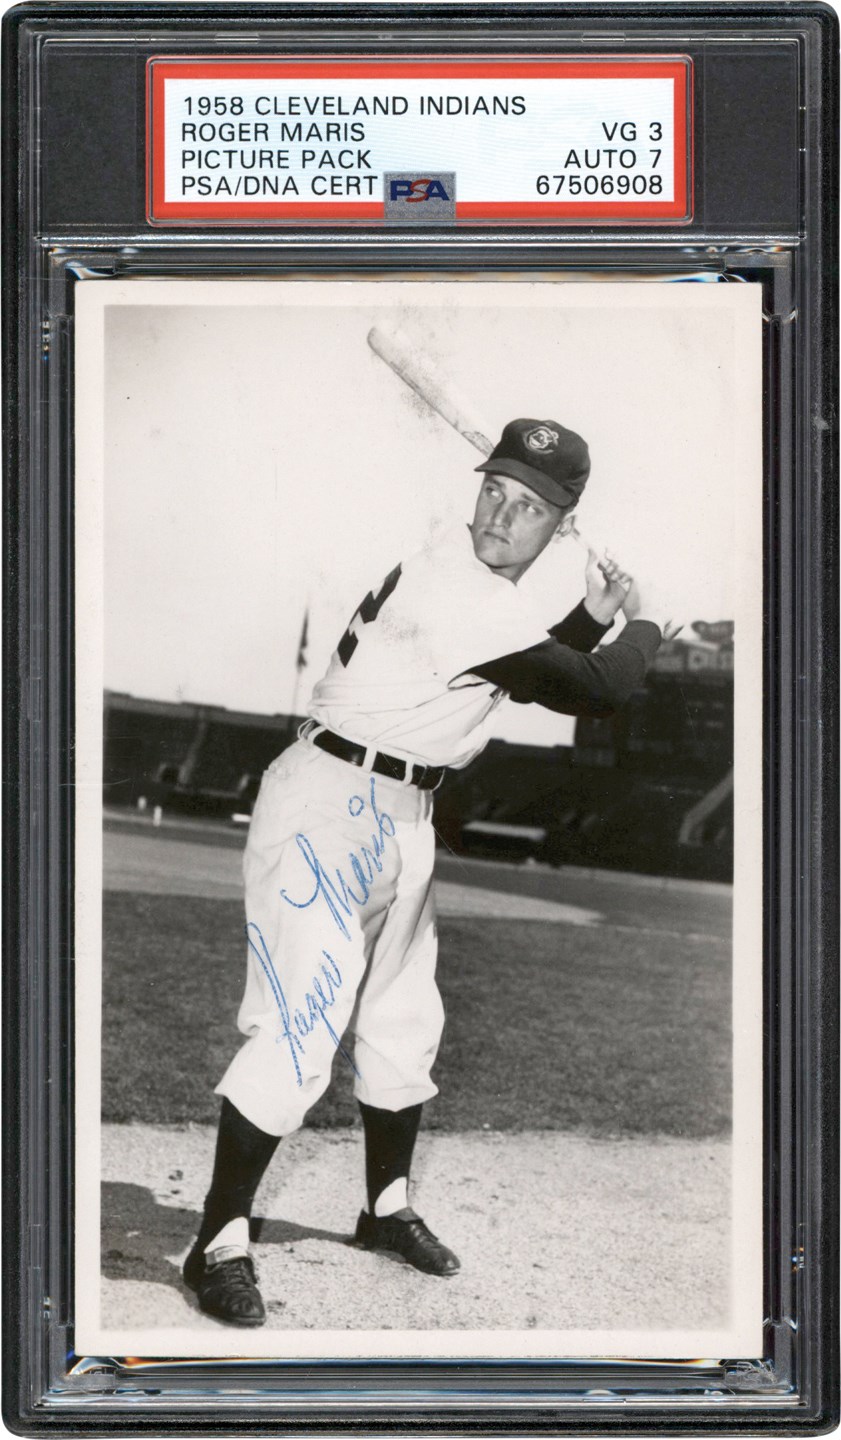 - Signed 1958 Cleveland Indians Picture Pack Roger Maris Rookie Card PSA VG 3 Auto 7